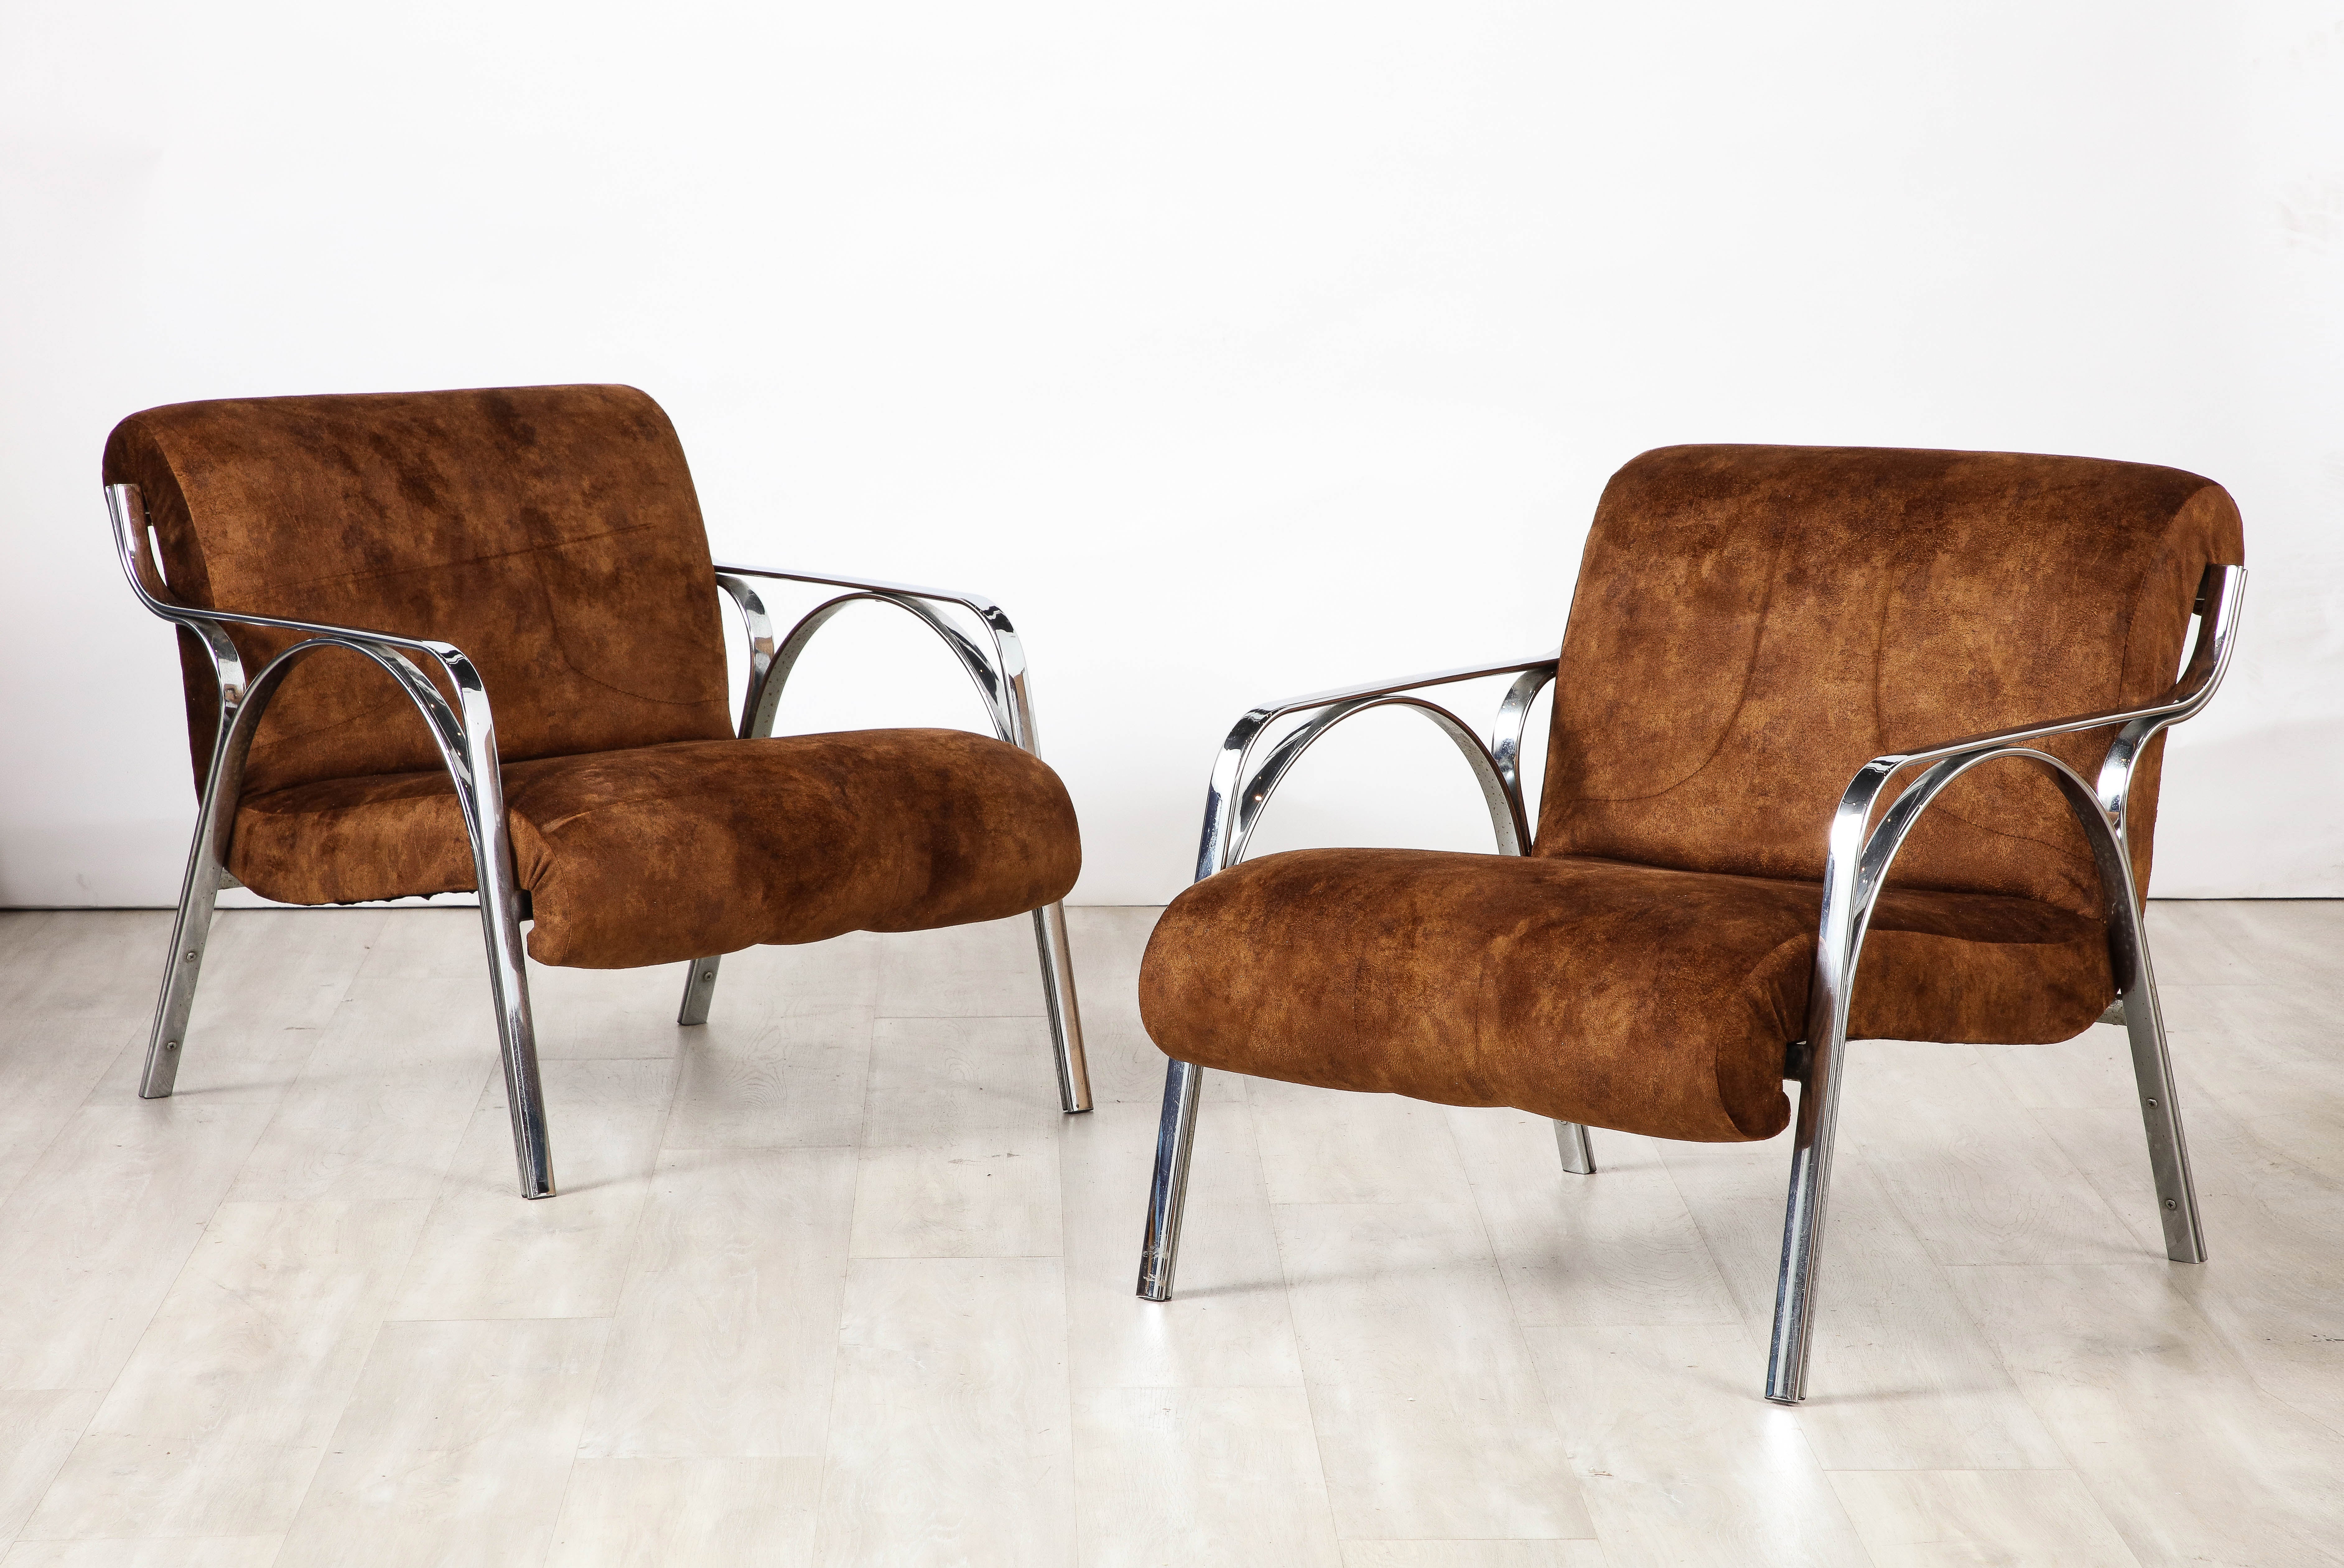 A pair  of lounge chairs / armchairs by Gianni Moscatelli, for Formanova, 1970's. 
The chairs display a sleek and sinuous shaped chrome design for which Moscatelli was known. Newly re-upholstered in a chocolate brown Ultrasuede, which mimics the